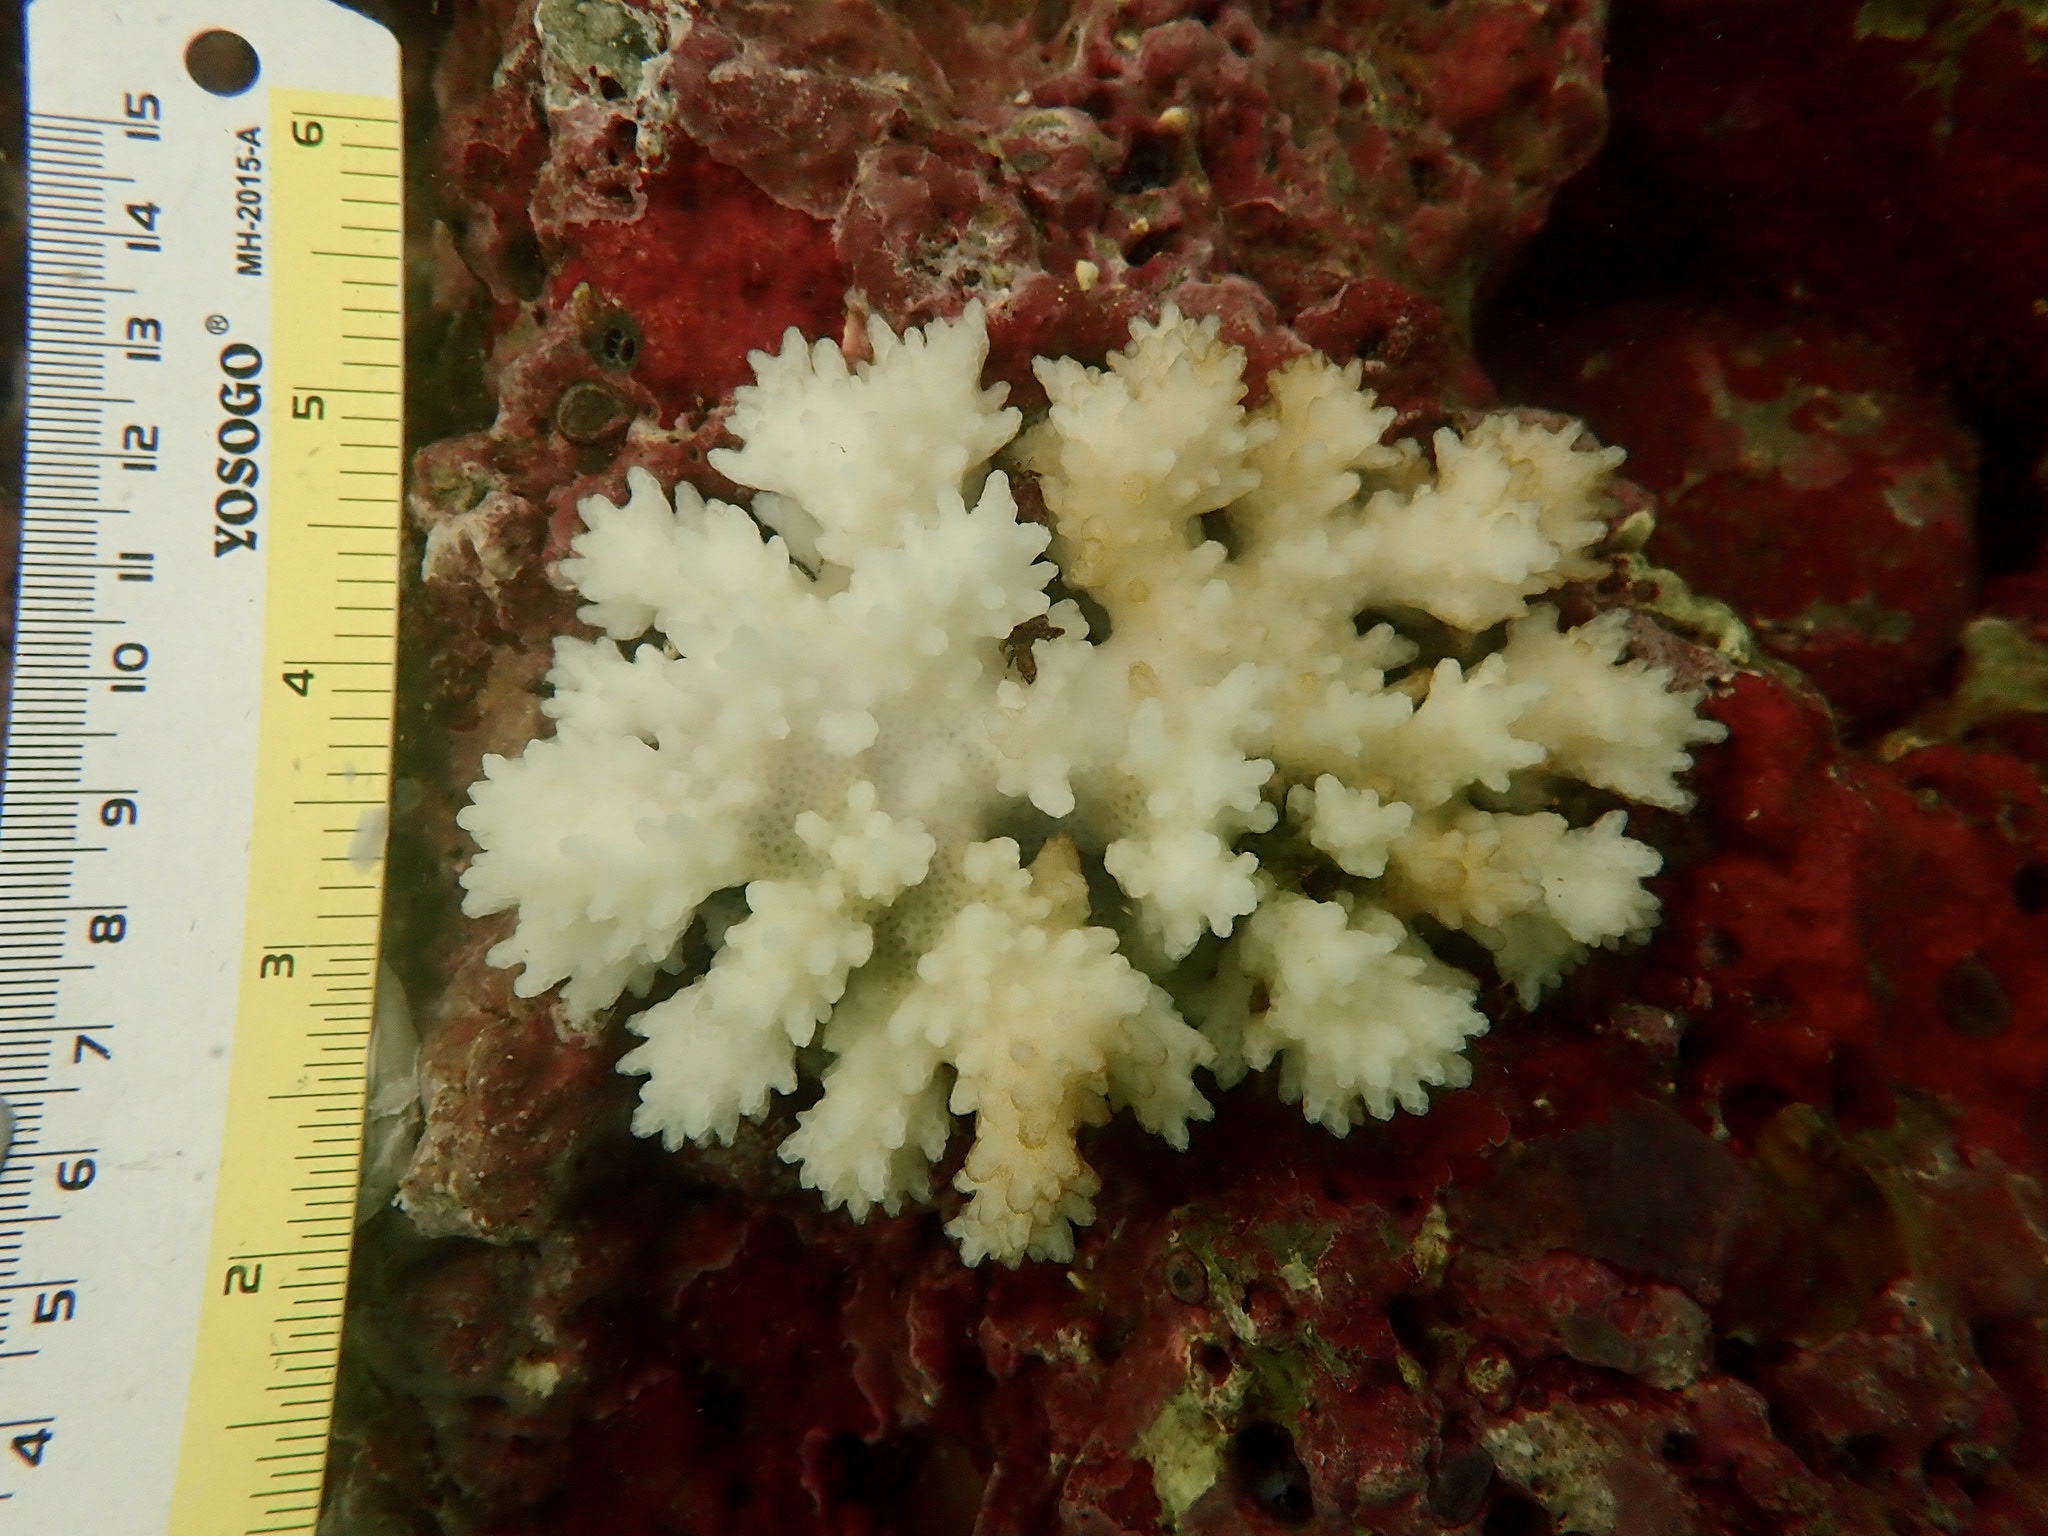 A coral monitored for bleaching